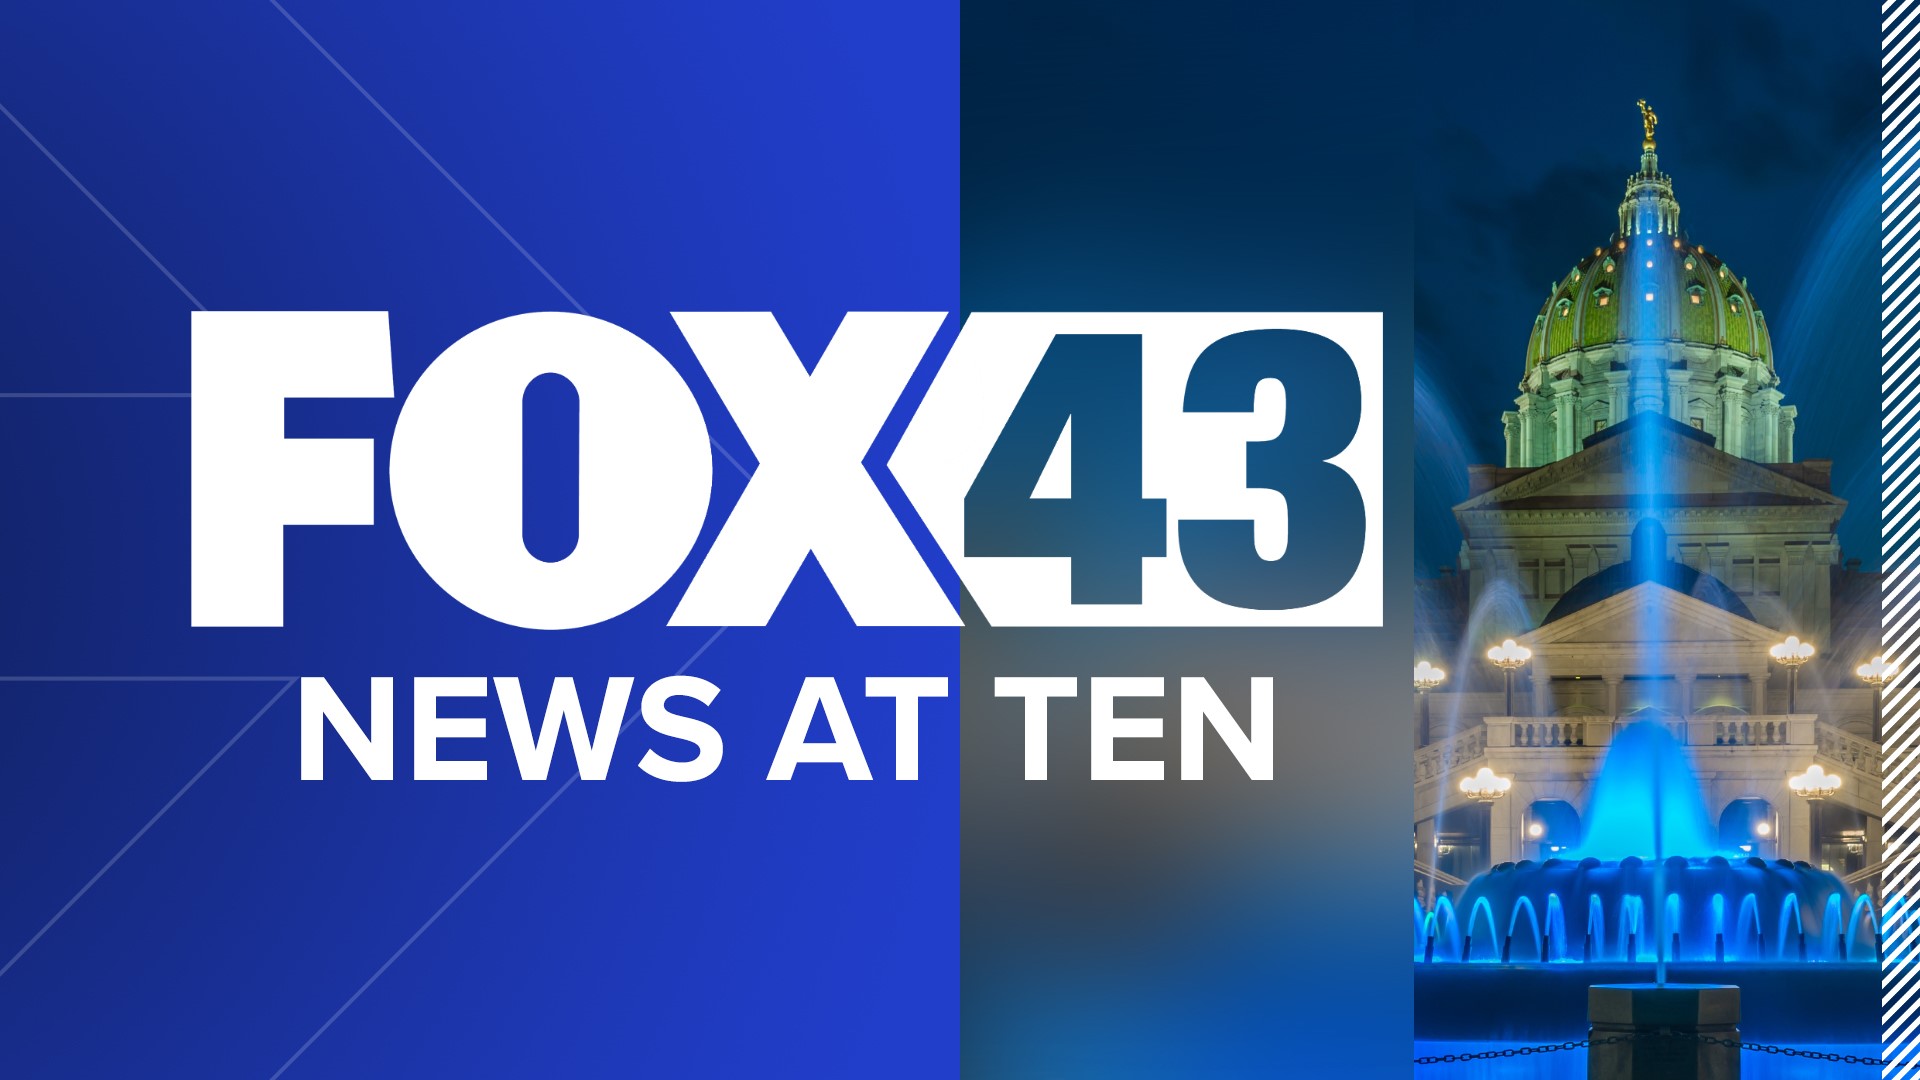 Get the late news without having to stay up. Watch FOX43 News at Ten and expect more.